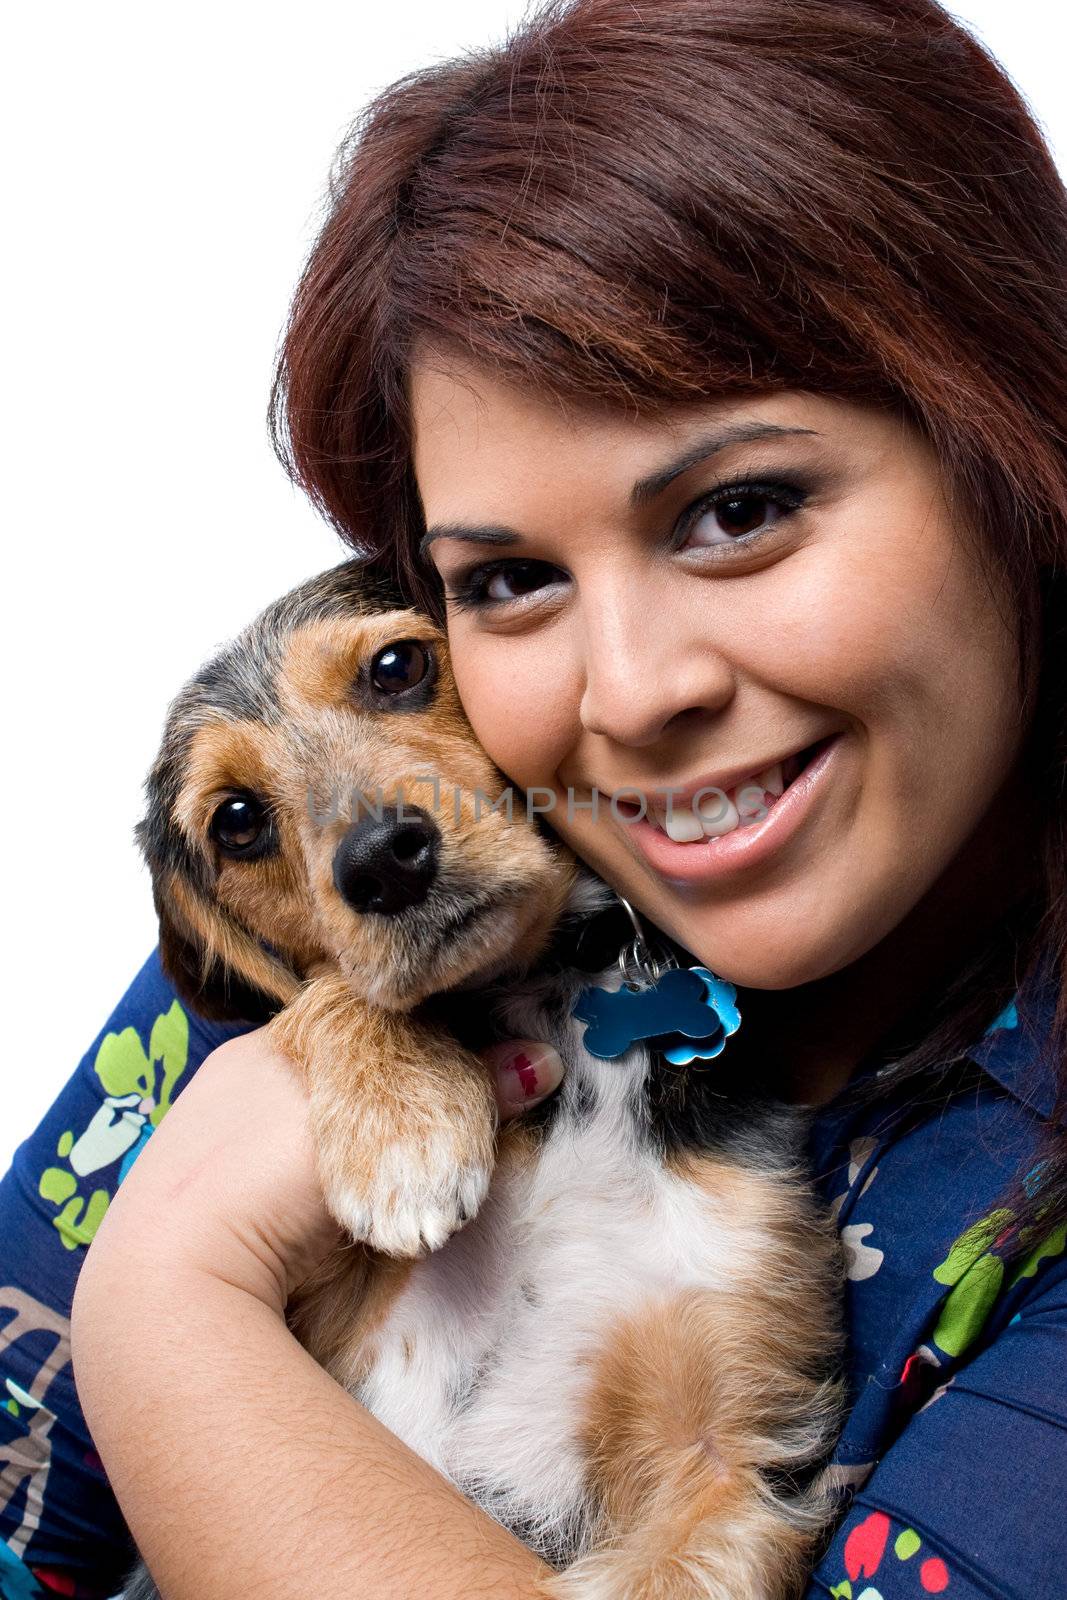 A young woman cuddling with a cute mixed breed puppy isolated on a white background. The dog is half beagle and half yorkie terrier.